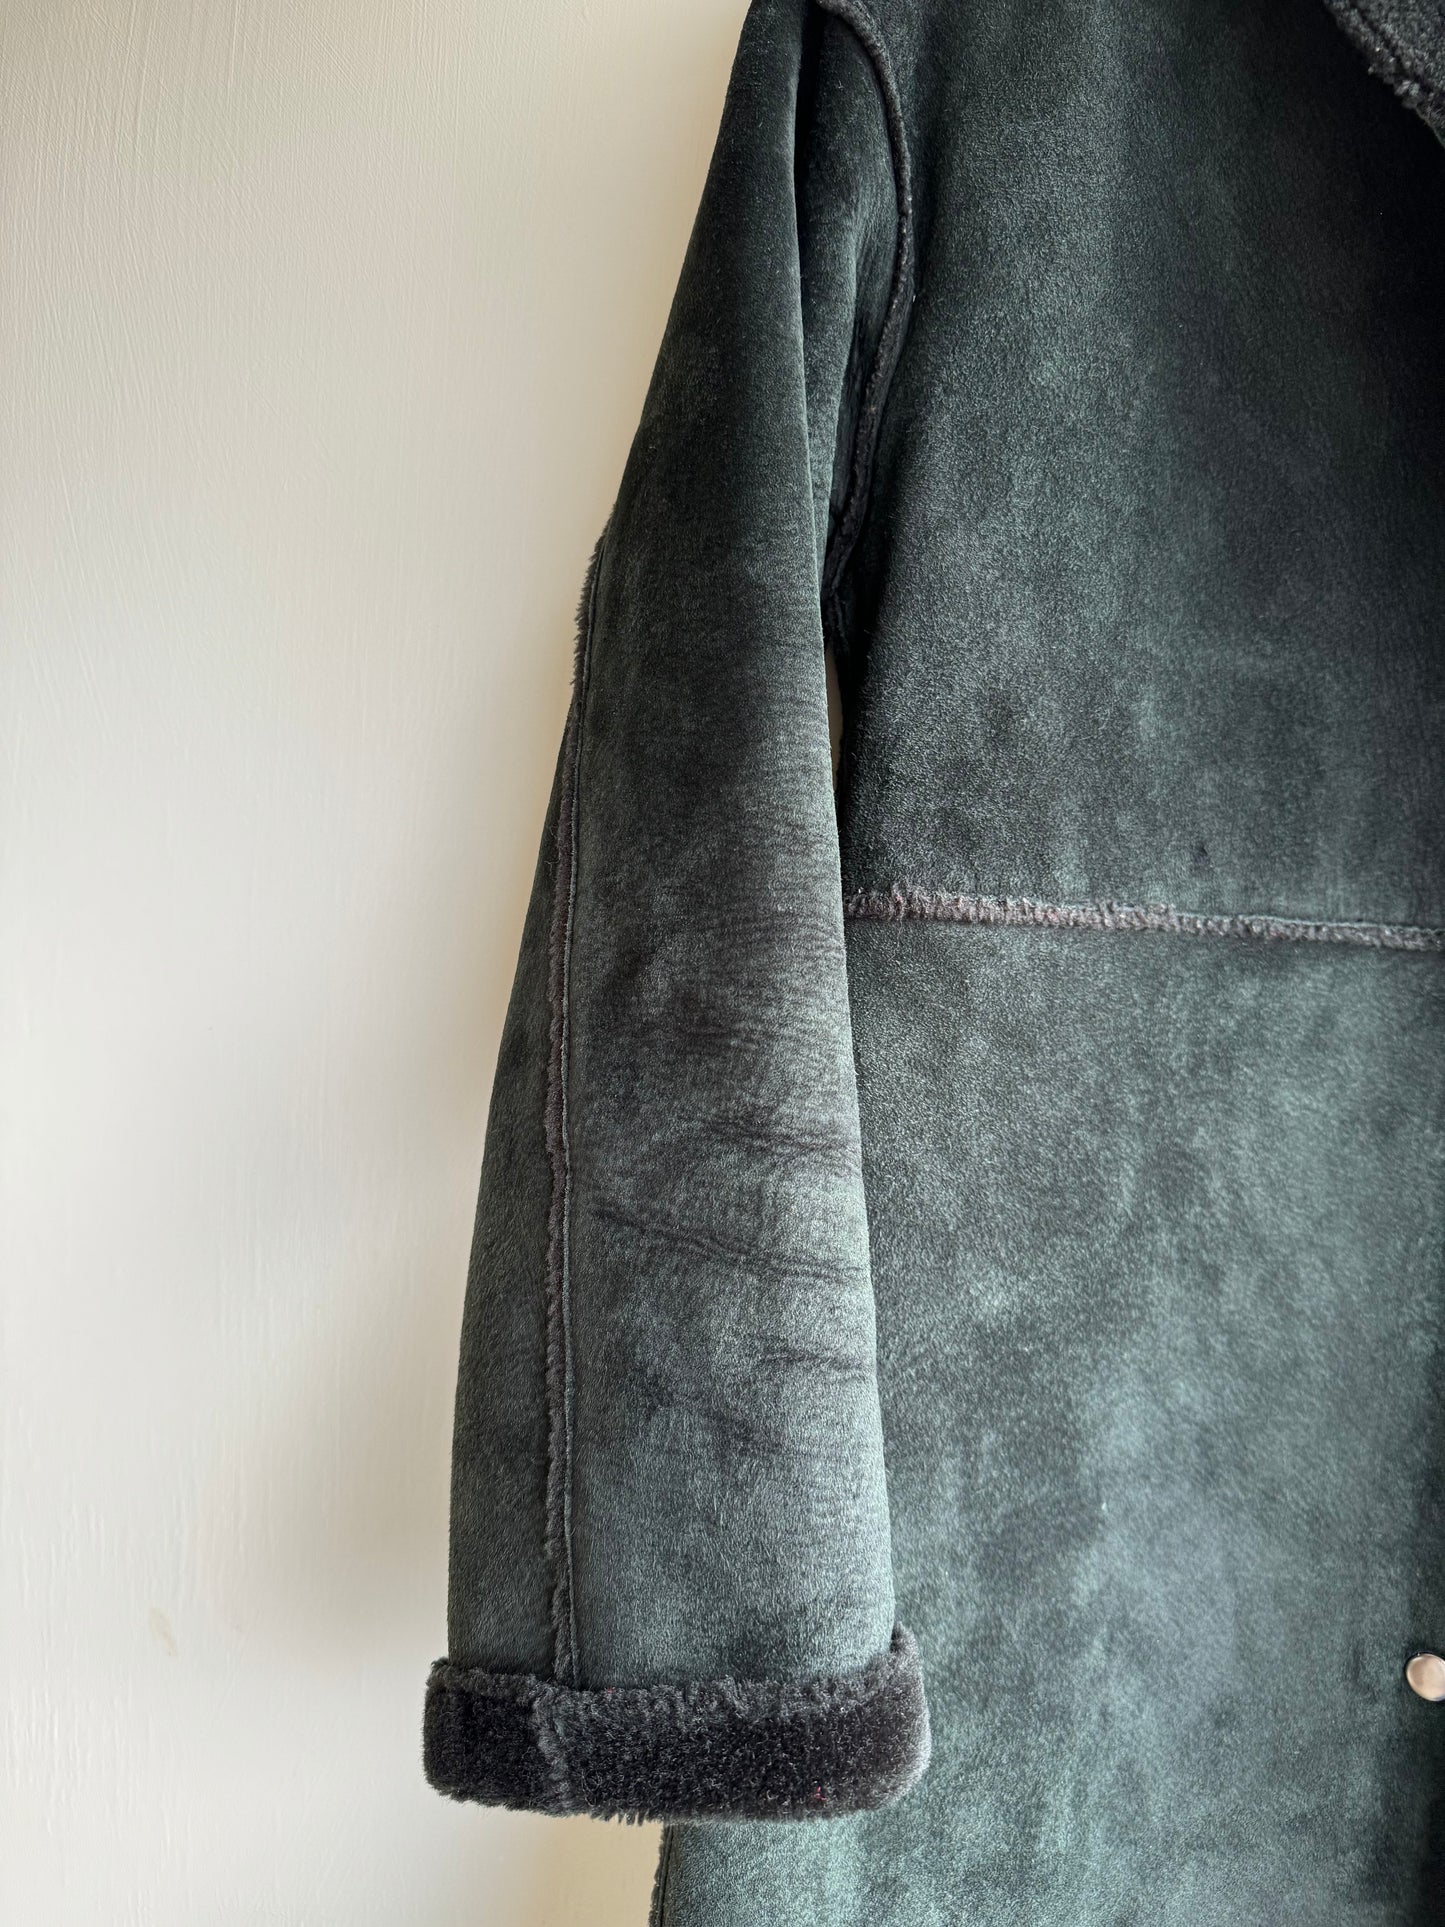 SUSTAIN VINTAGE LEATHER COAT FROM NYC